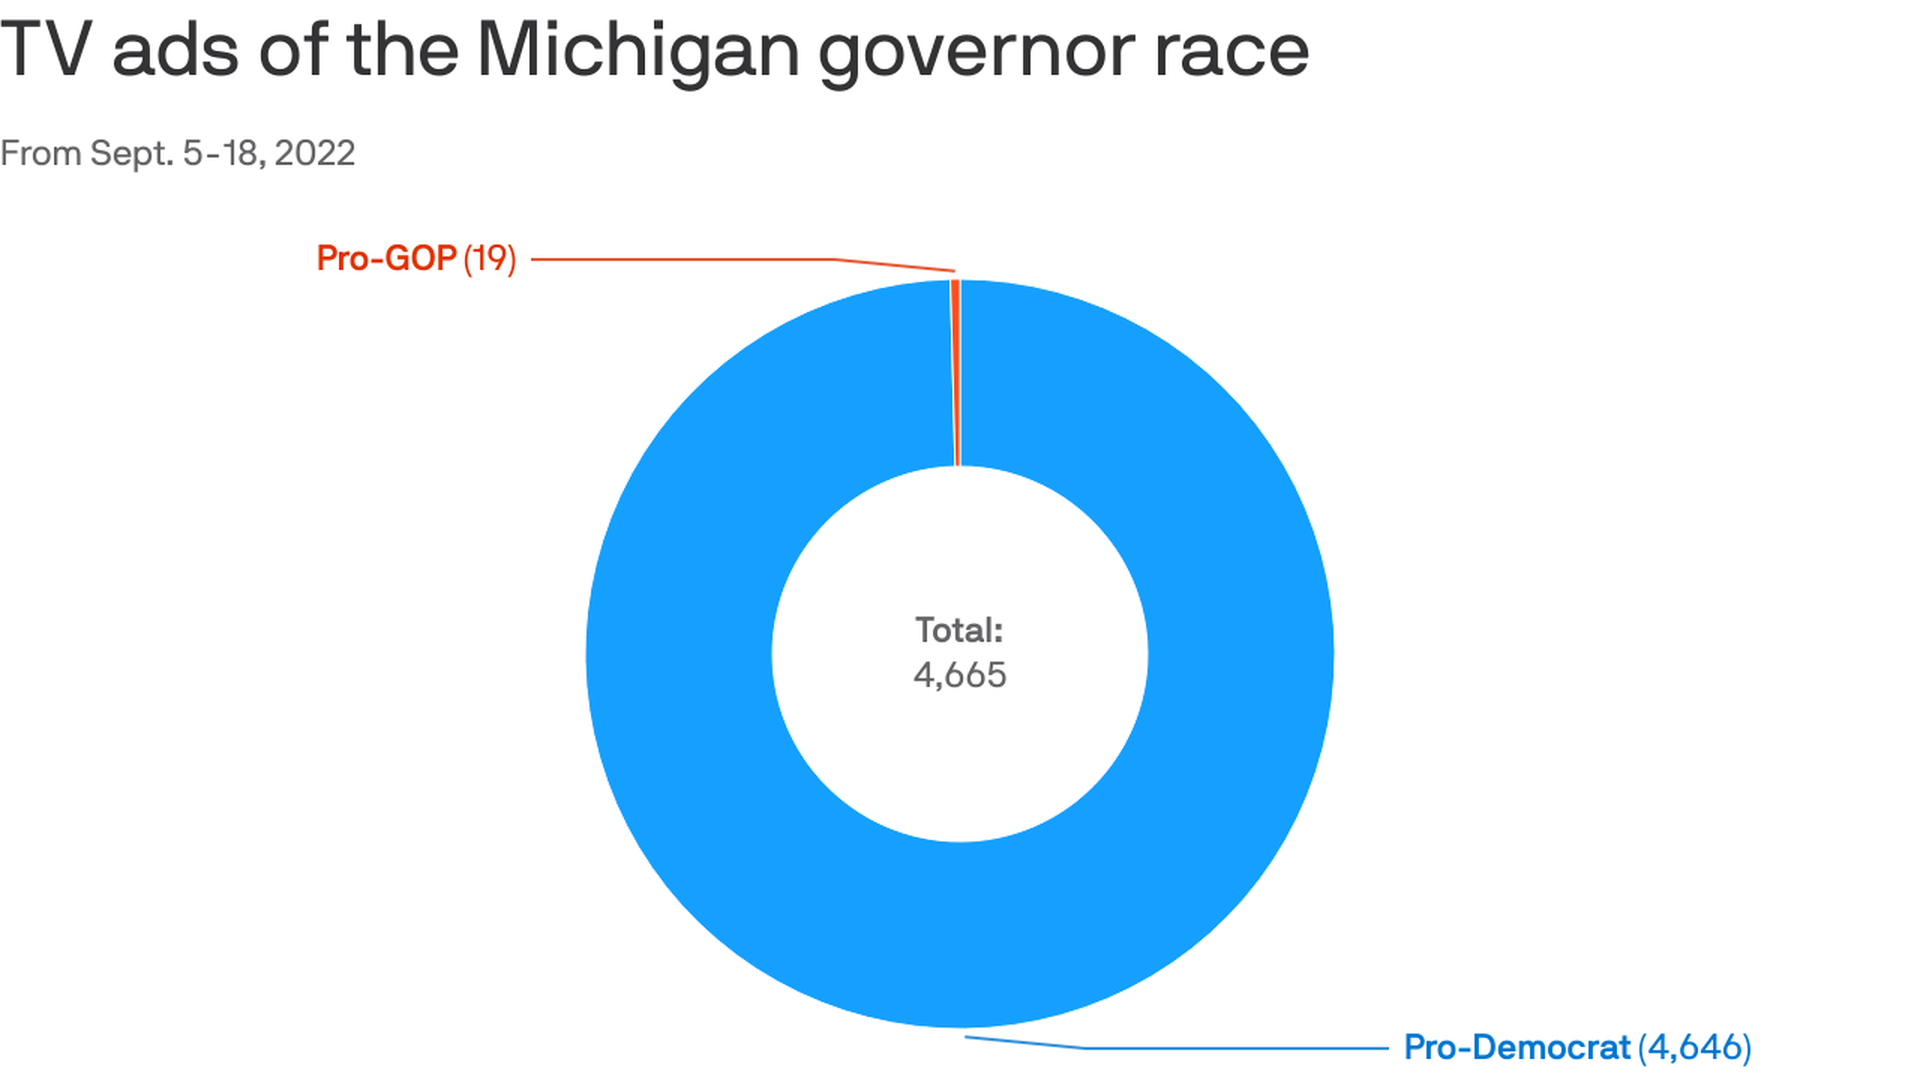 Graph showing tv ads for Michigan's governor's race